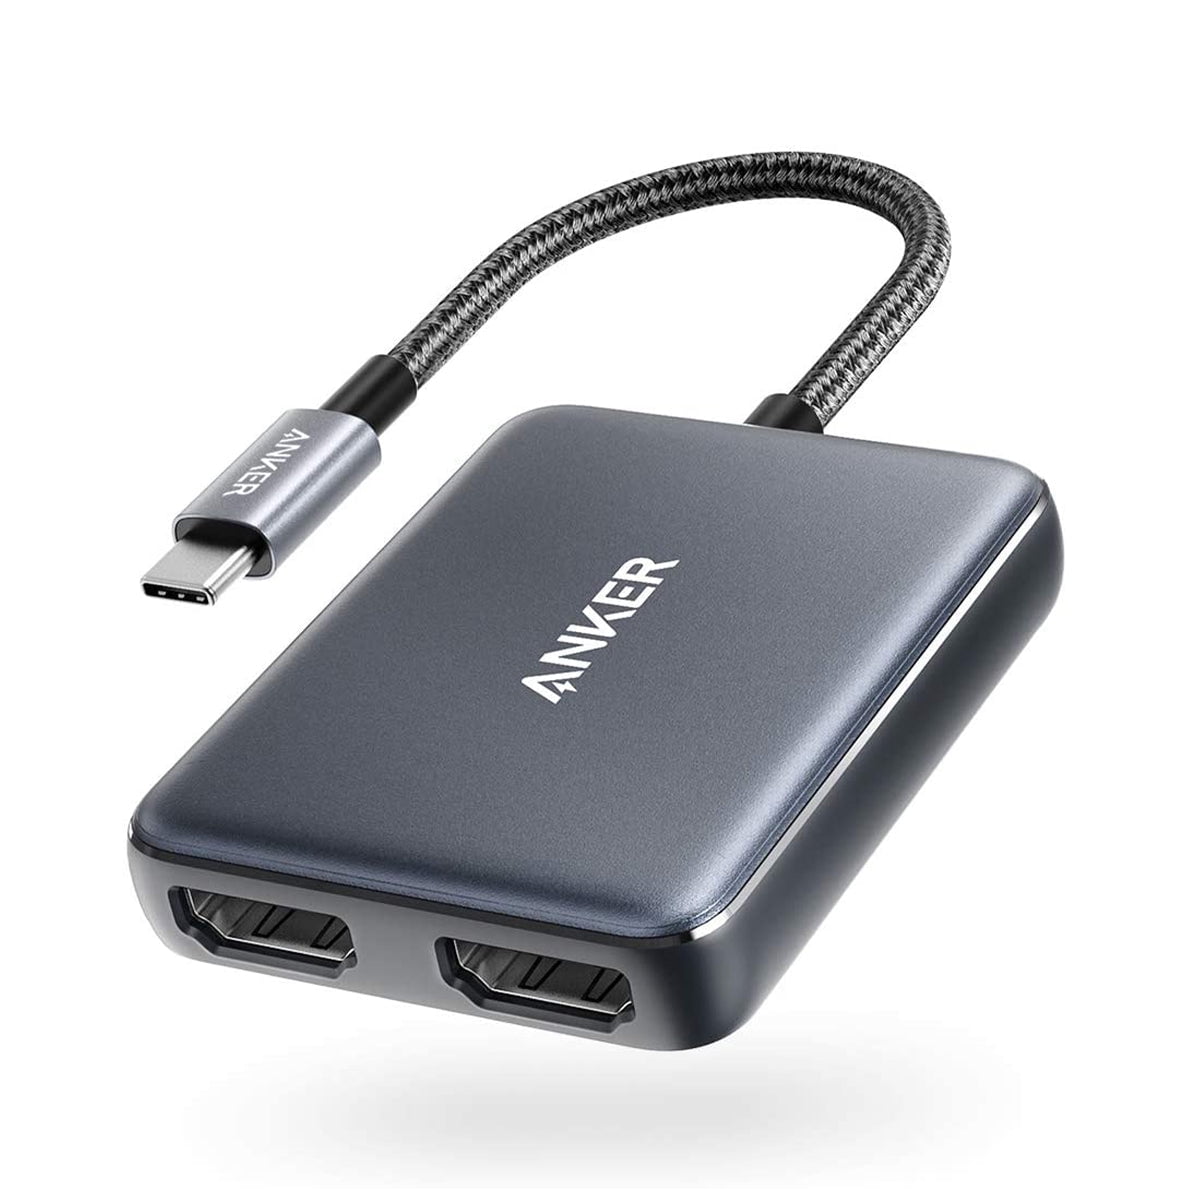 Anker USB C to Dual HDMI Adapter Supports 4K@60Hz and Dual 4K@30Hz MacBk Pro, Air, Pad Pro, and More - Walmart.com